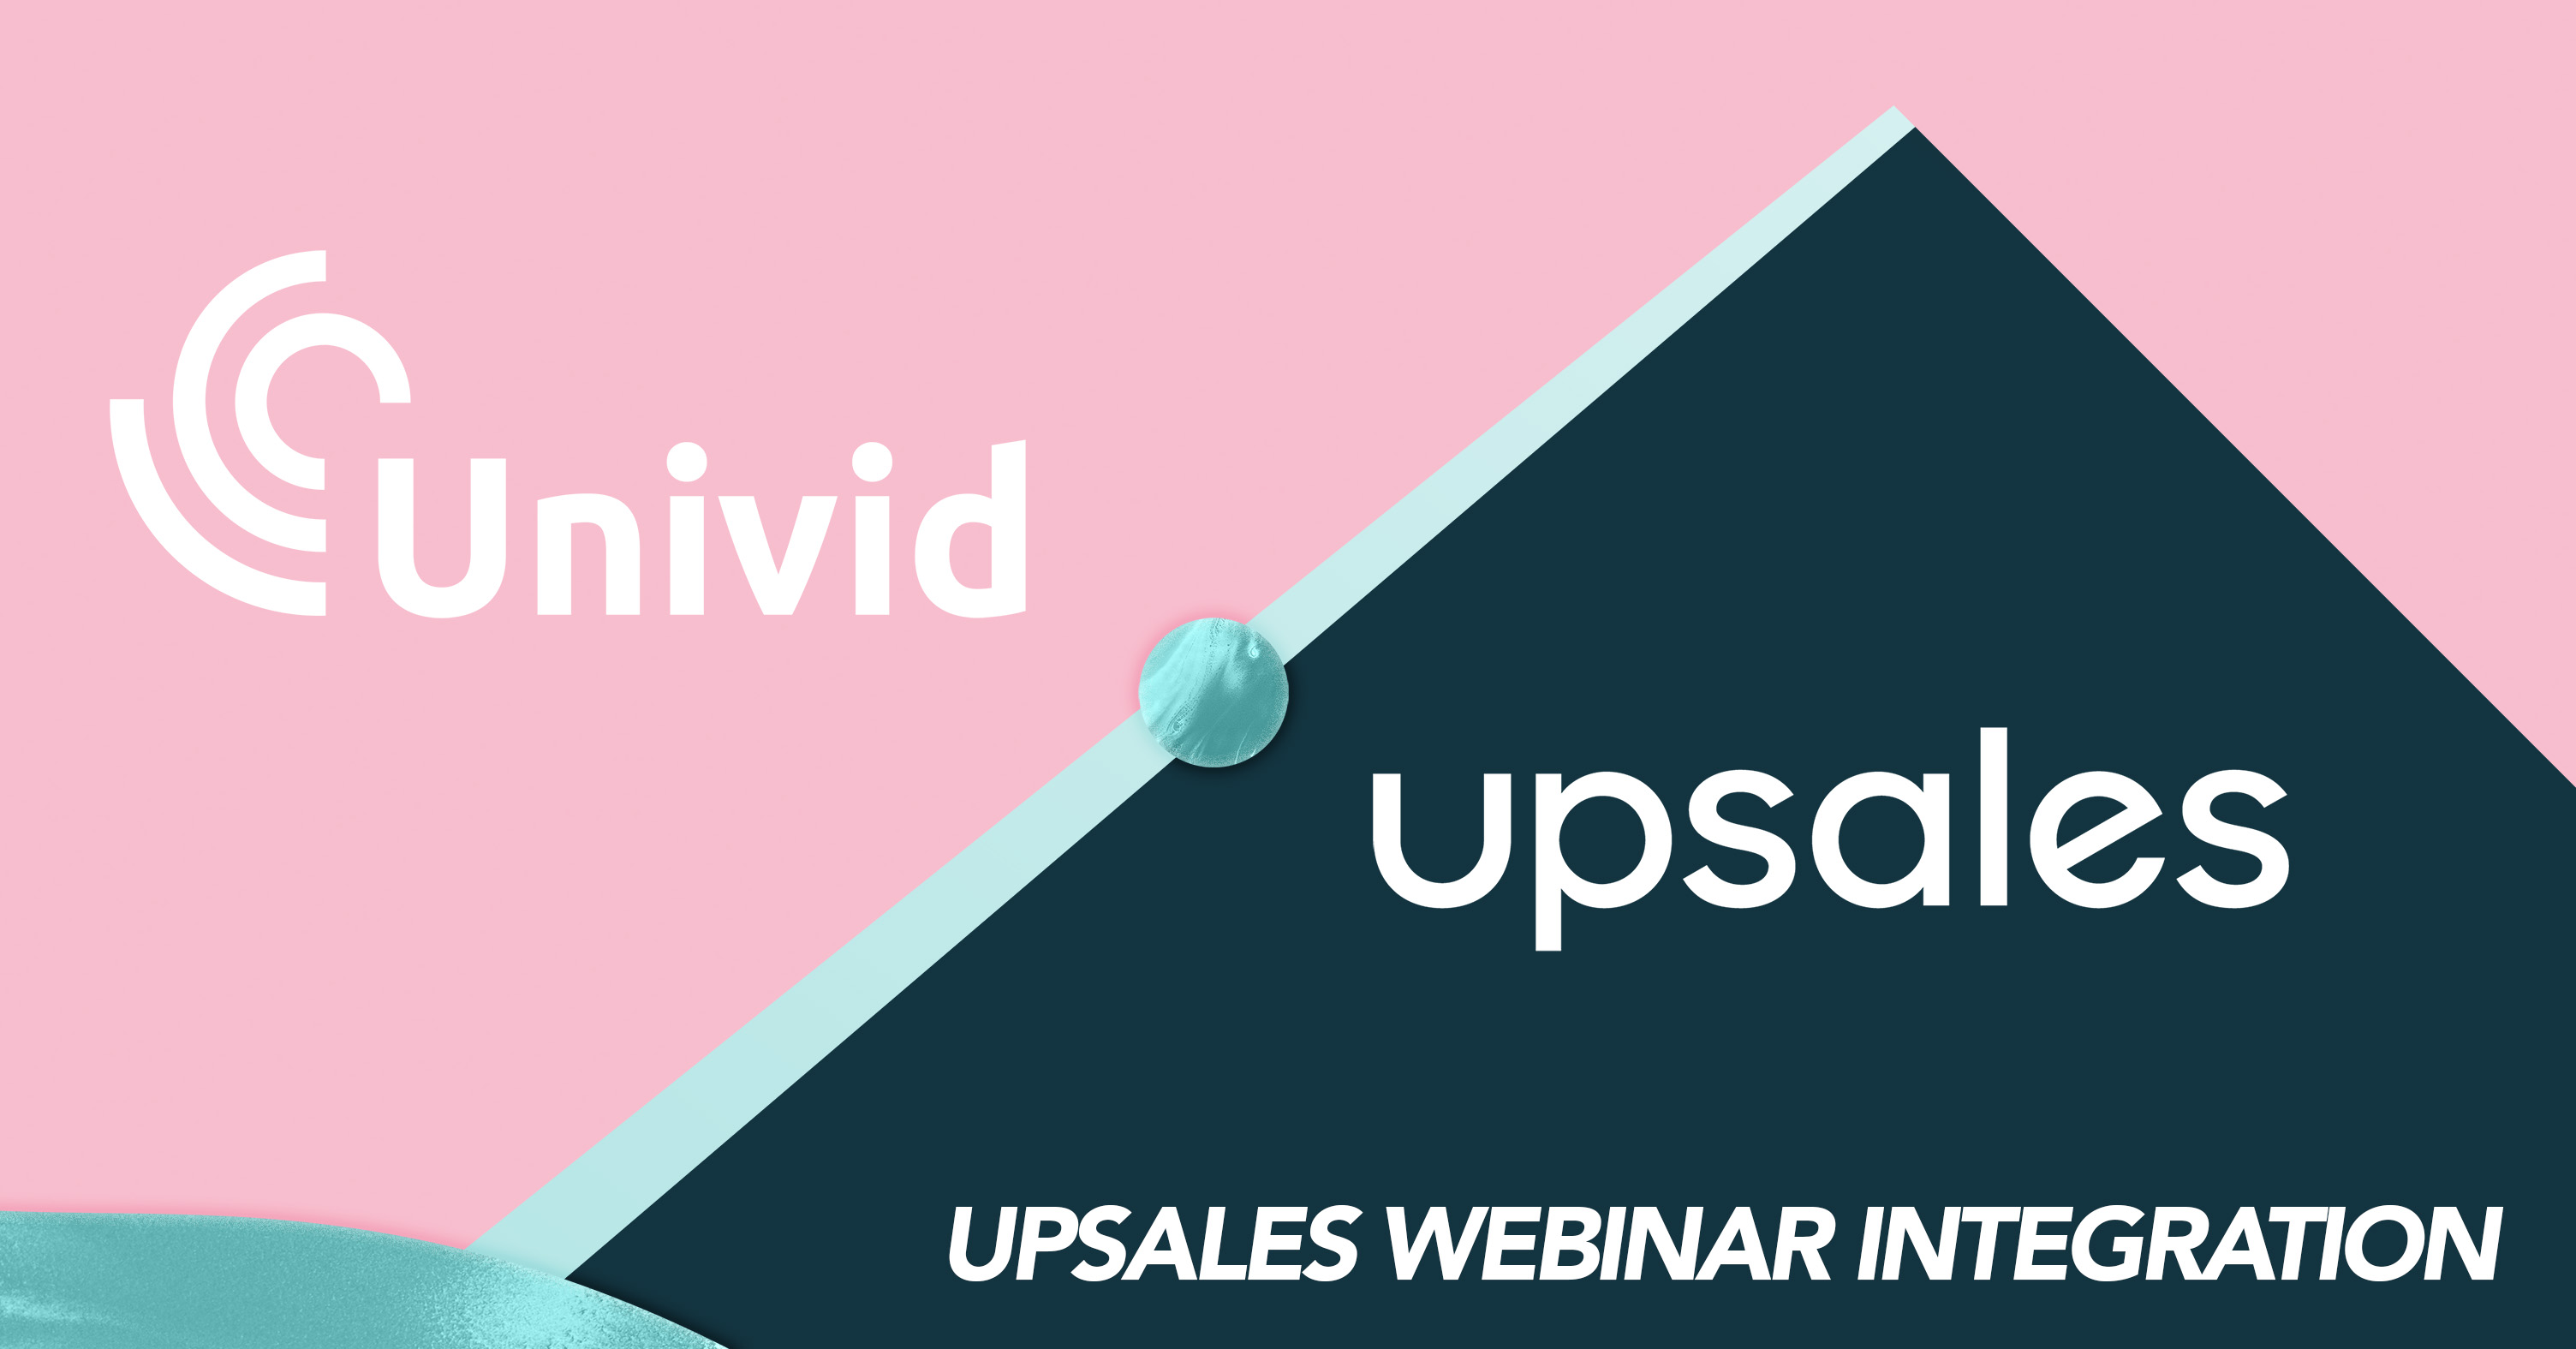 Connect your Univid webinars with Upsales CRM - through this Upsales webinar integration. Create Univid webinars from Upsales Events. Manage your event flow and registrations smoothly, and get engagement insights back into Upsales CRM.